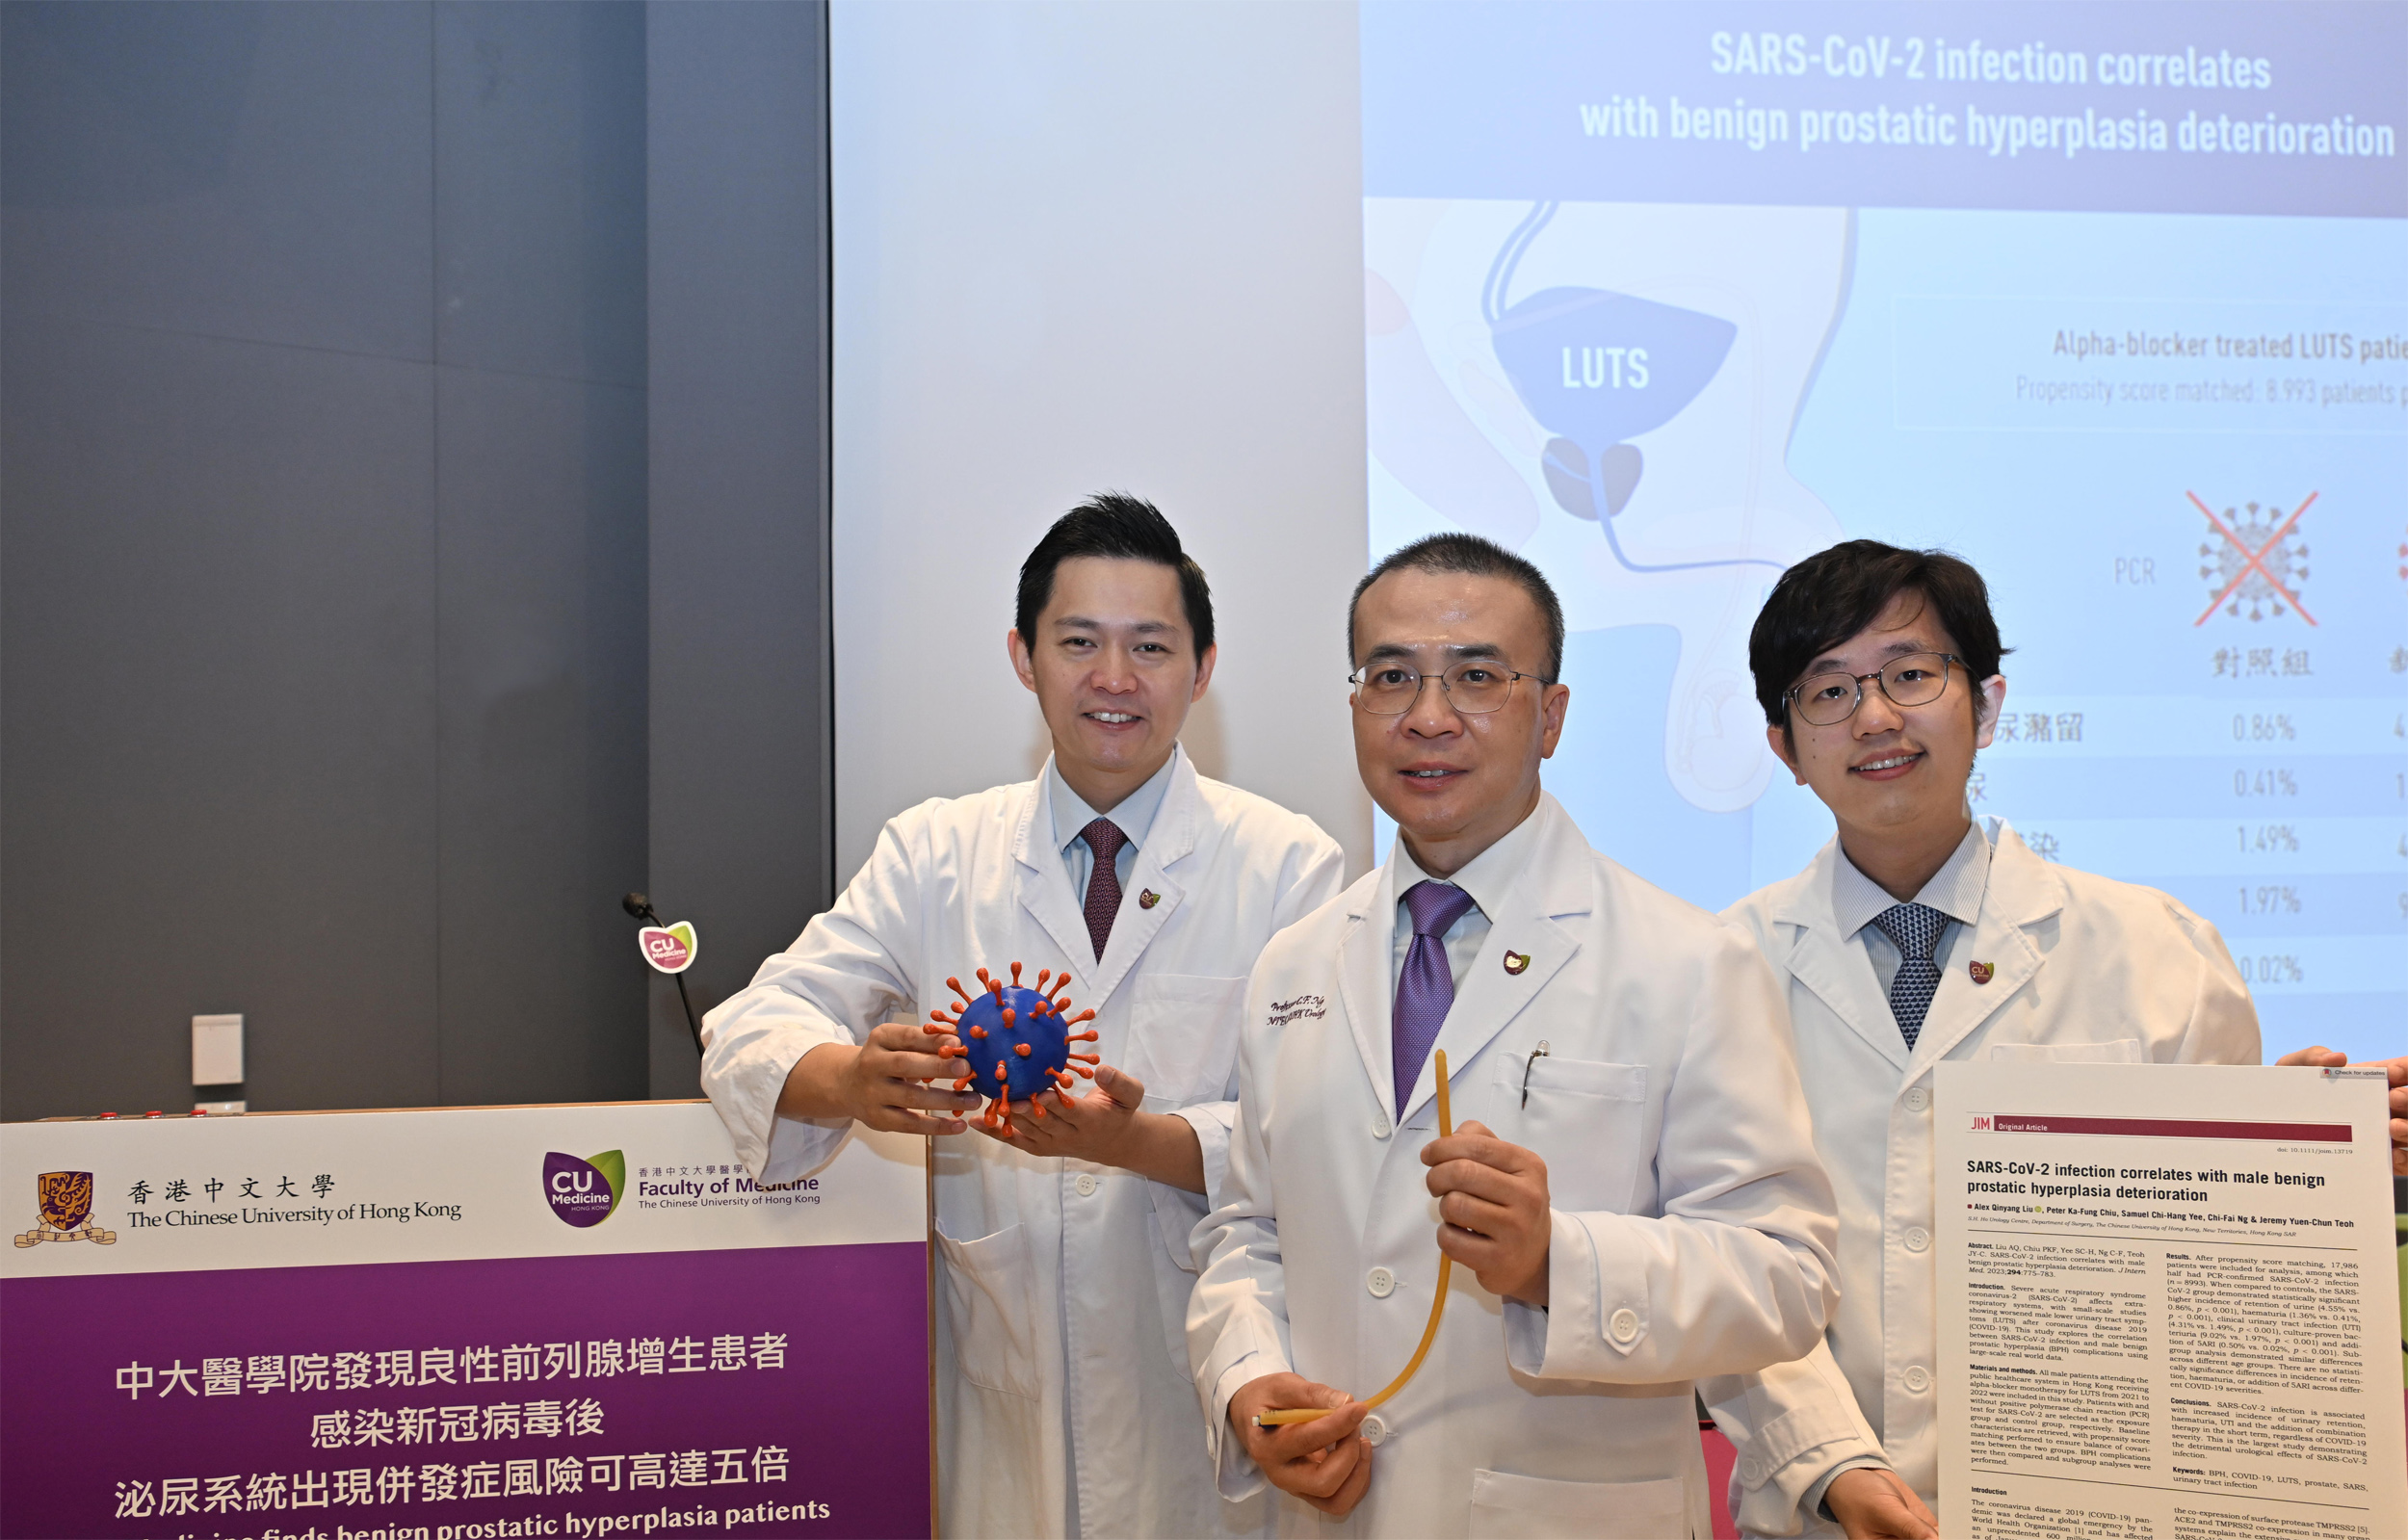 (From left) Dr Jeremy Teoh, Associate Professor, Division of Urology; Professor Ng Chi-fai, Tzu Leung Ho Professor of Urology, Department of Surgery at CU Medicine; and Dr Alex Liu, Resident, Division of Urology, Department of Surgery at the Prince of Wales Hospital.